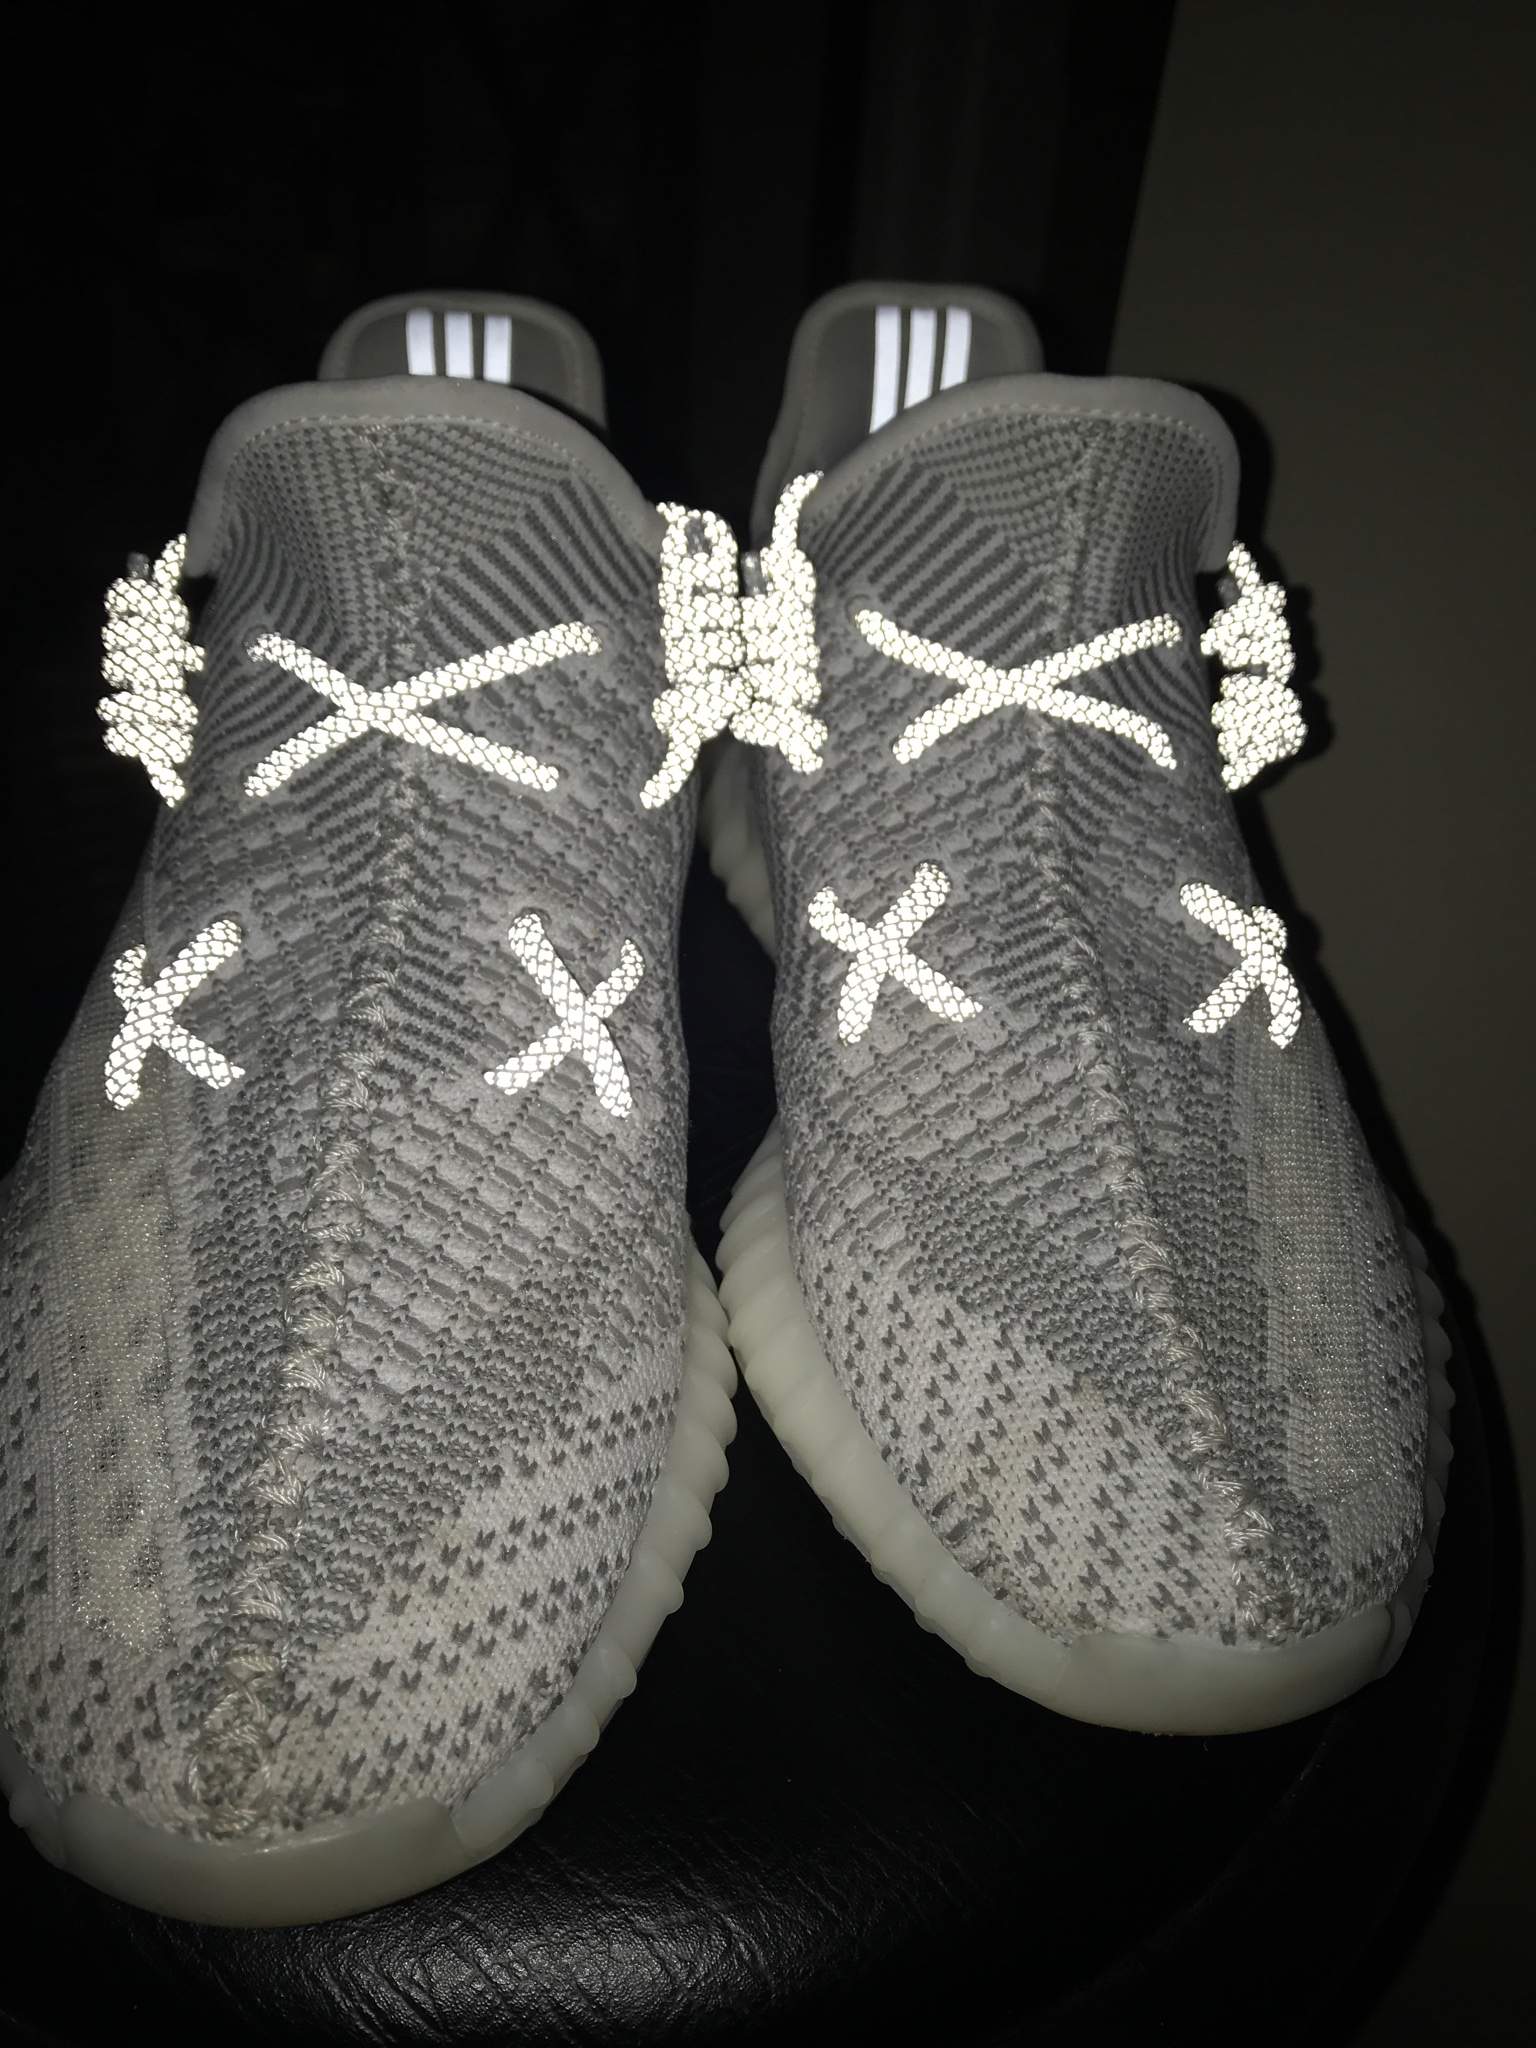 Pics Of Yeezys - How To Tie A Bowline Knot | sunwalls